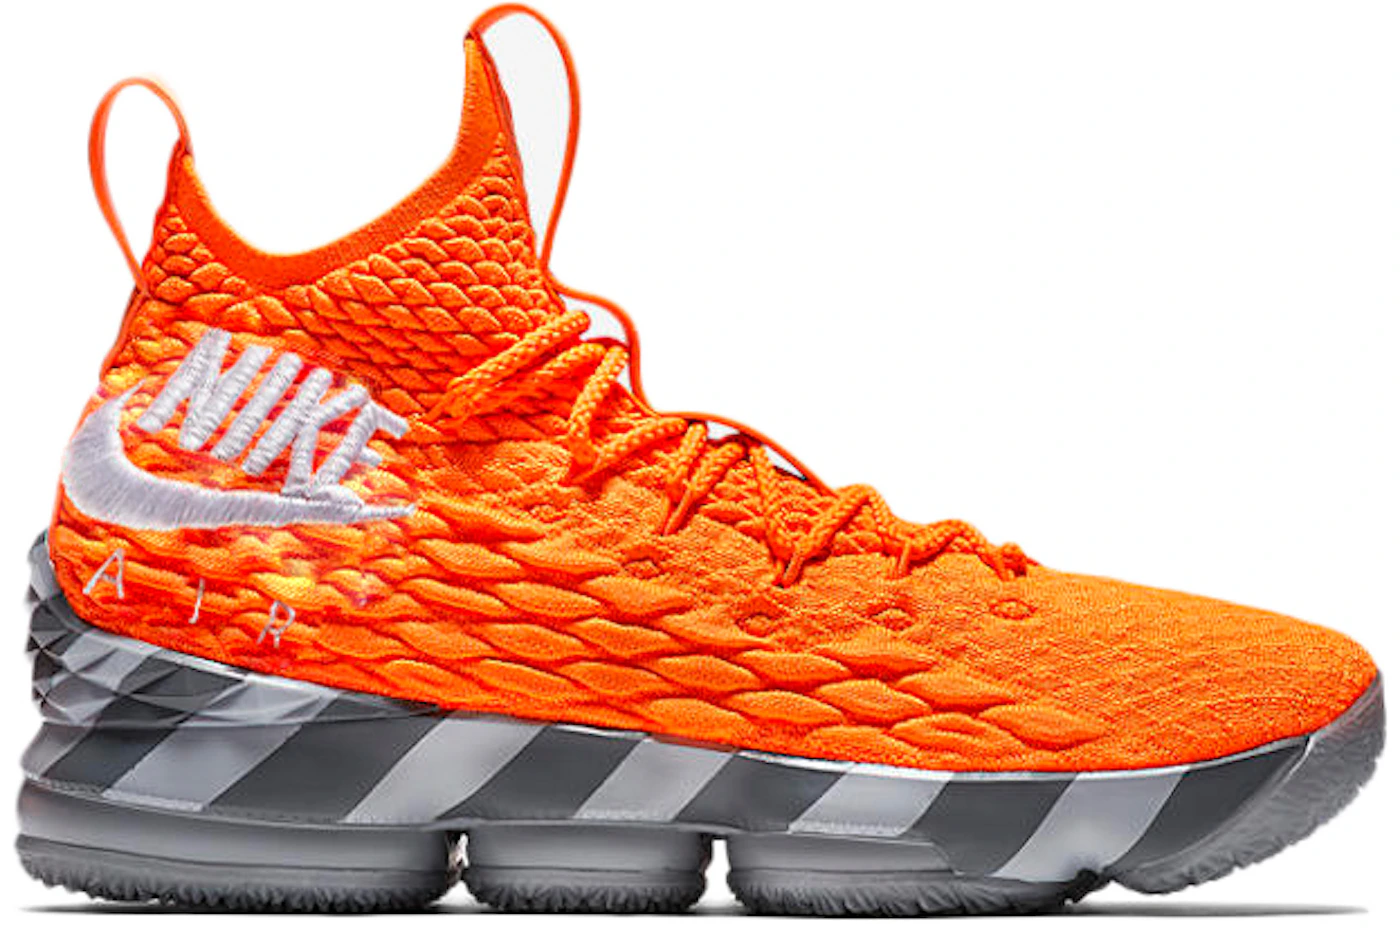 Nike LeBron 15 Orange Box (House of Hoops Special Box and Accessories ...